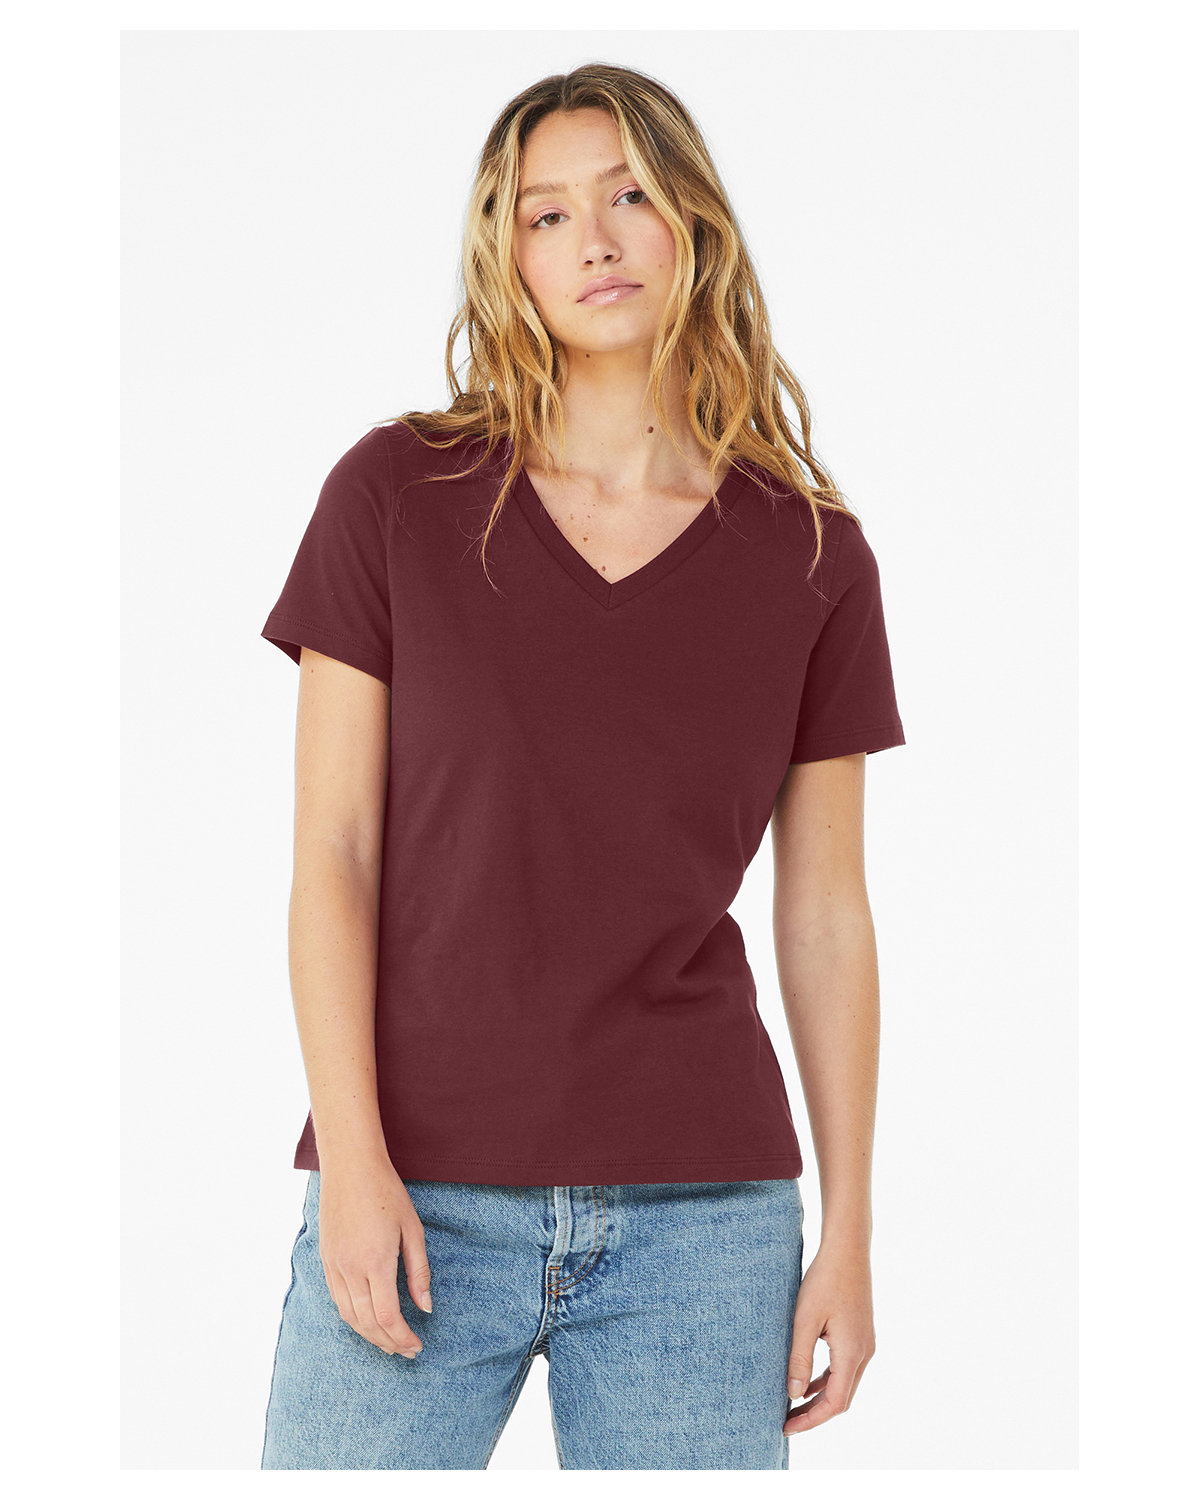 Bella + Canvas Ladies' Relaxed Jersey V-Neck T-Shirt MAROON 